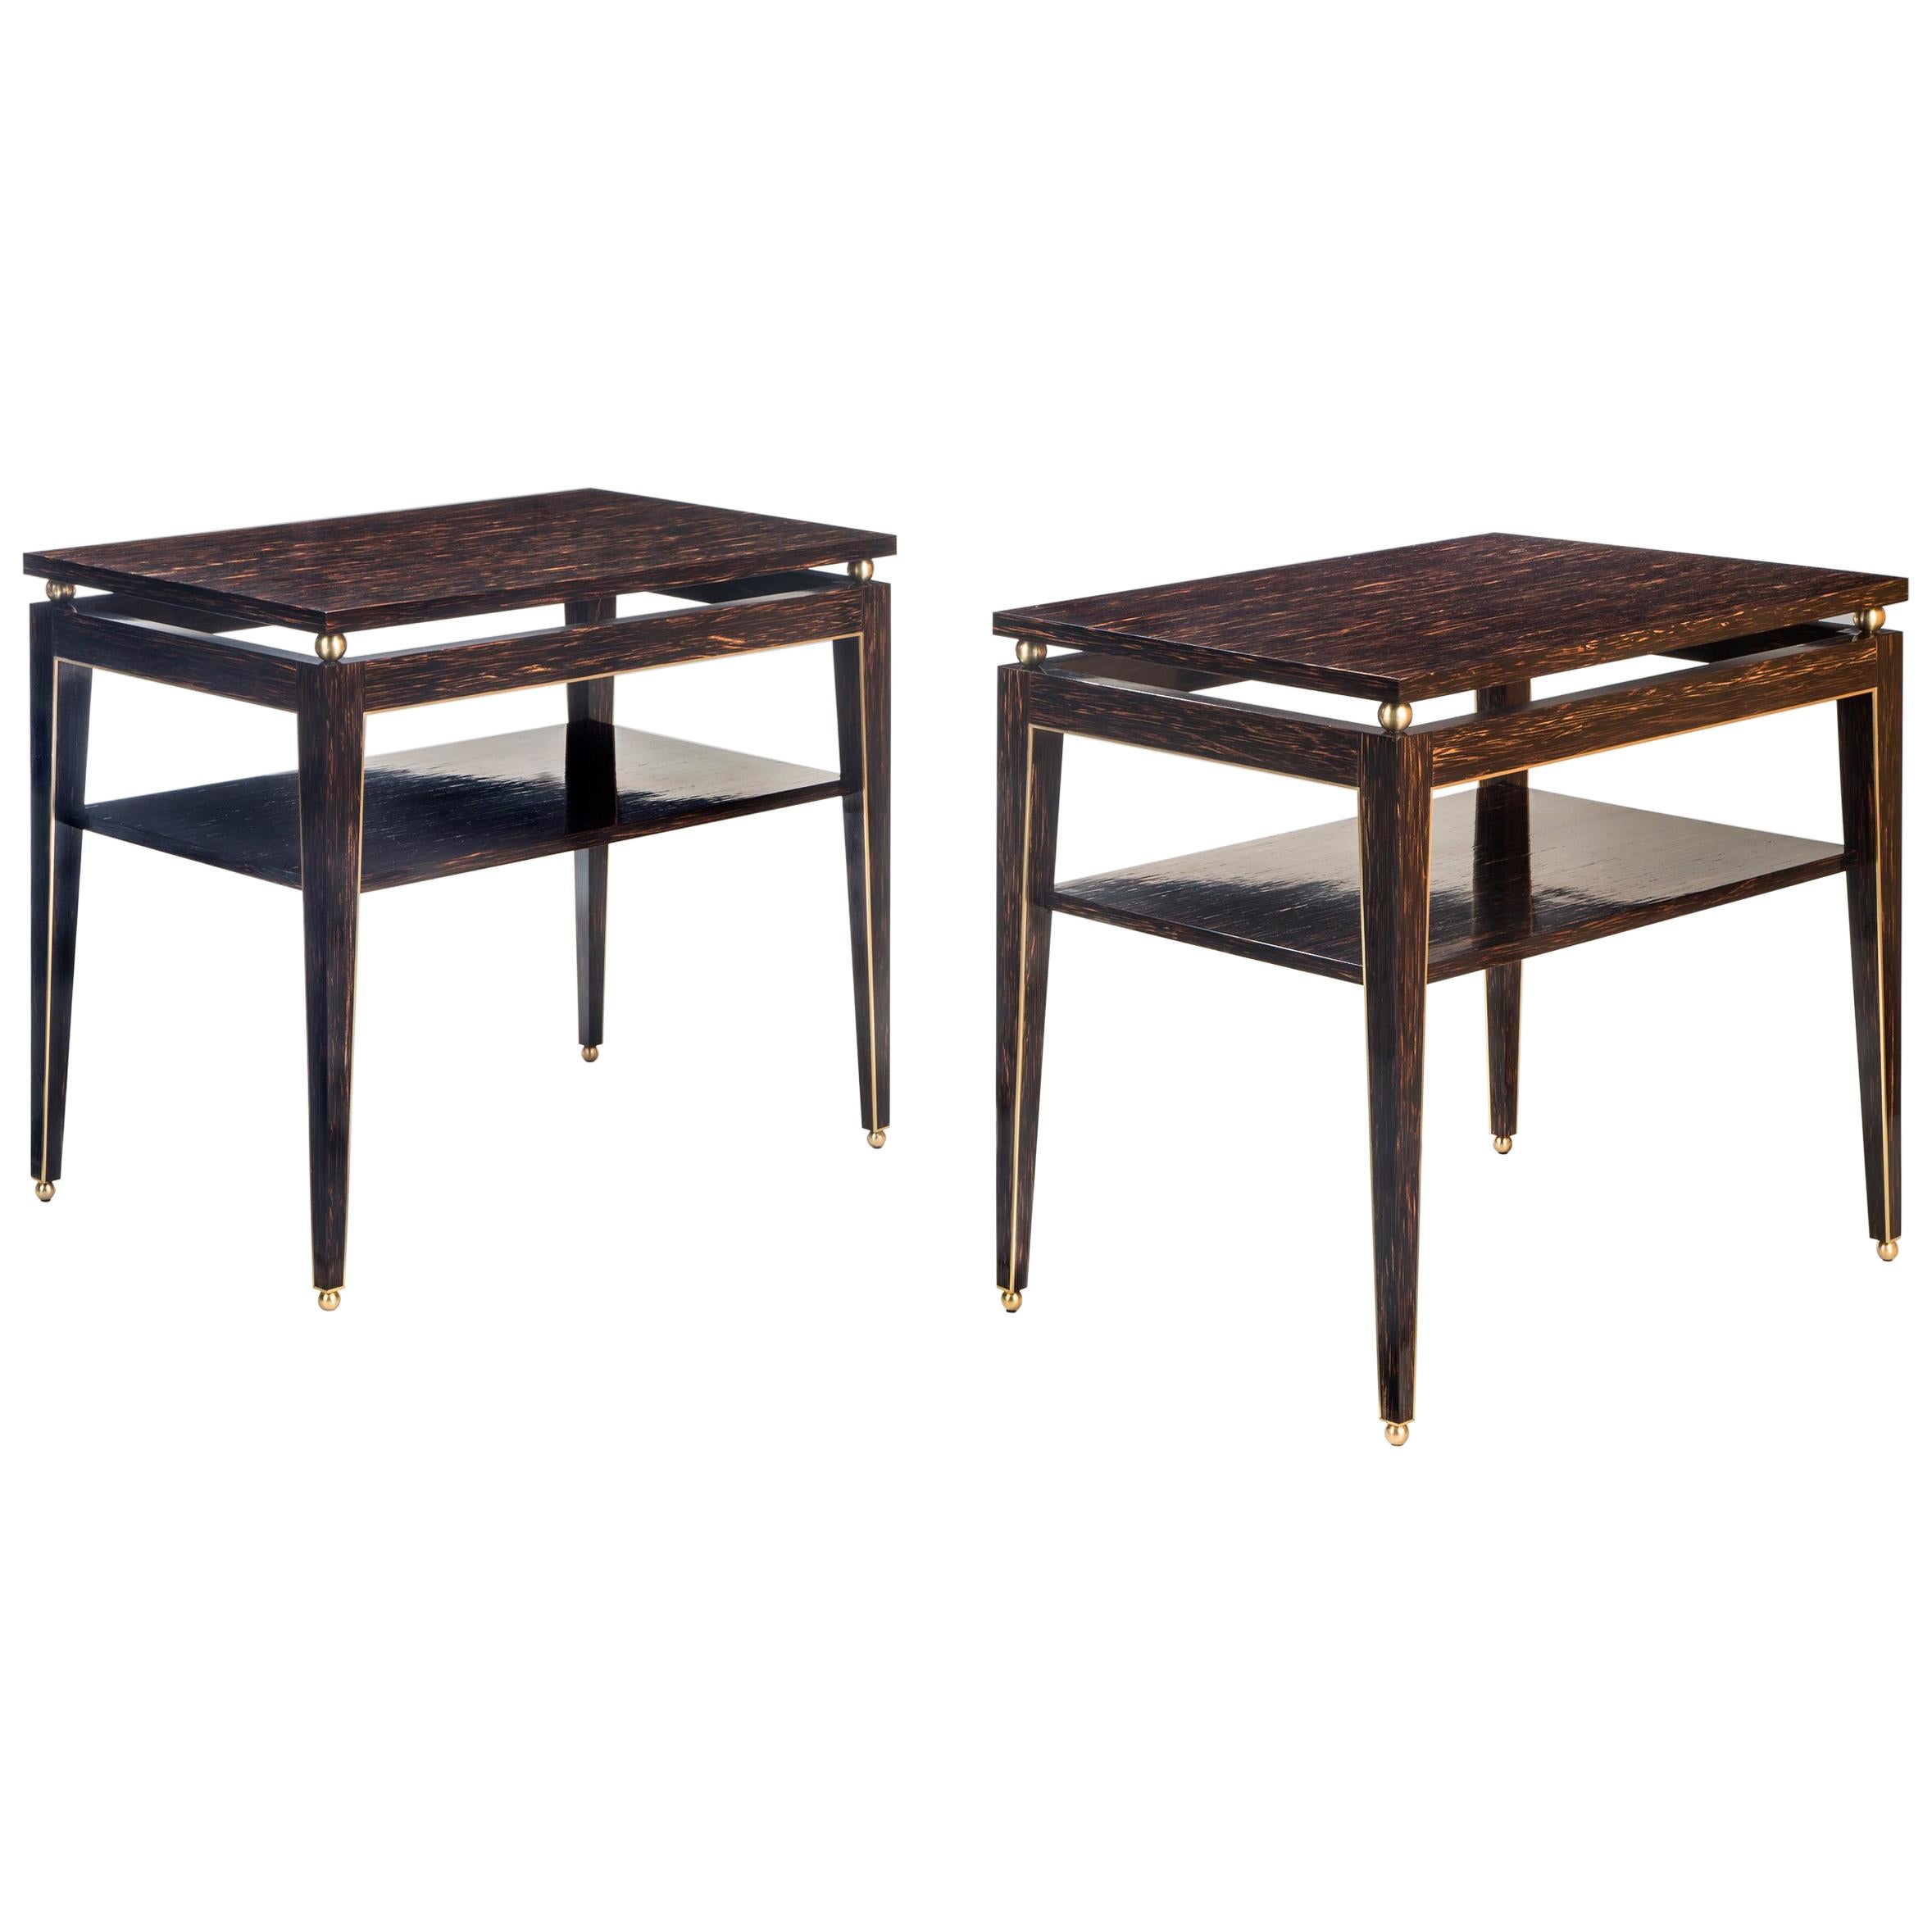 Gerard Feretti, Pair of Versatile Brass Mounted Palm Wood Tables For Sale